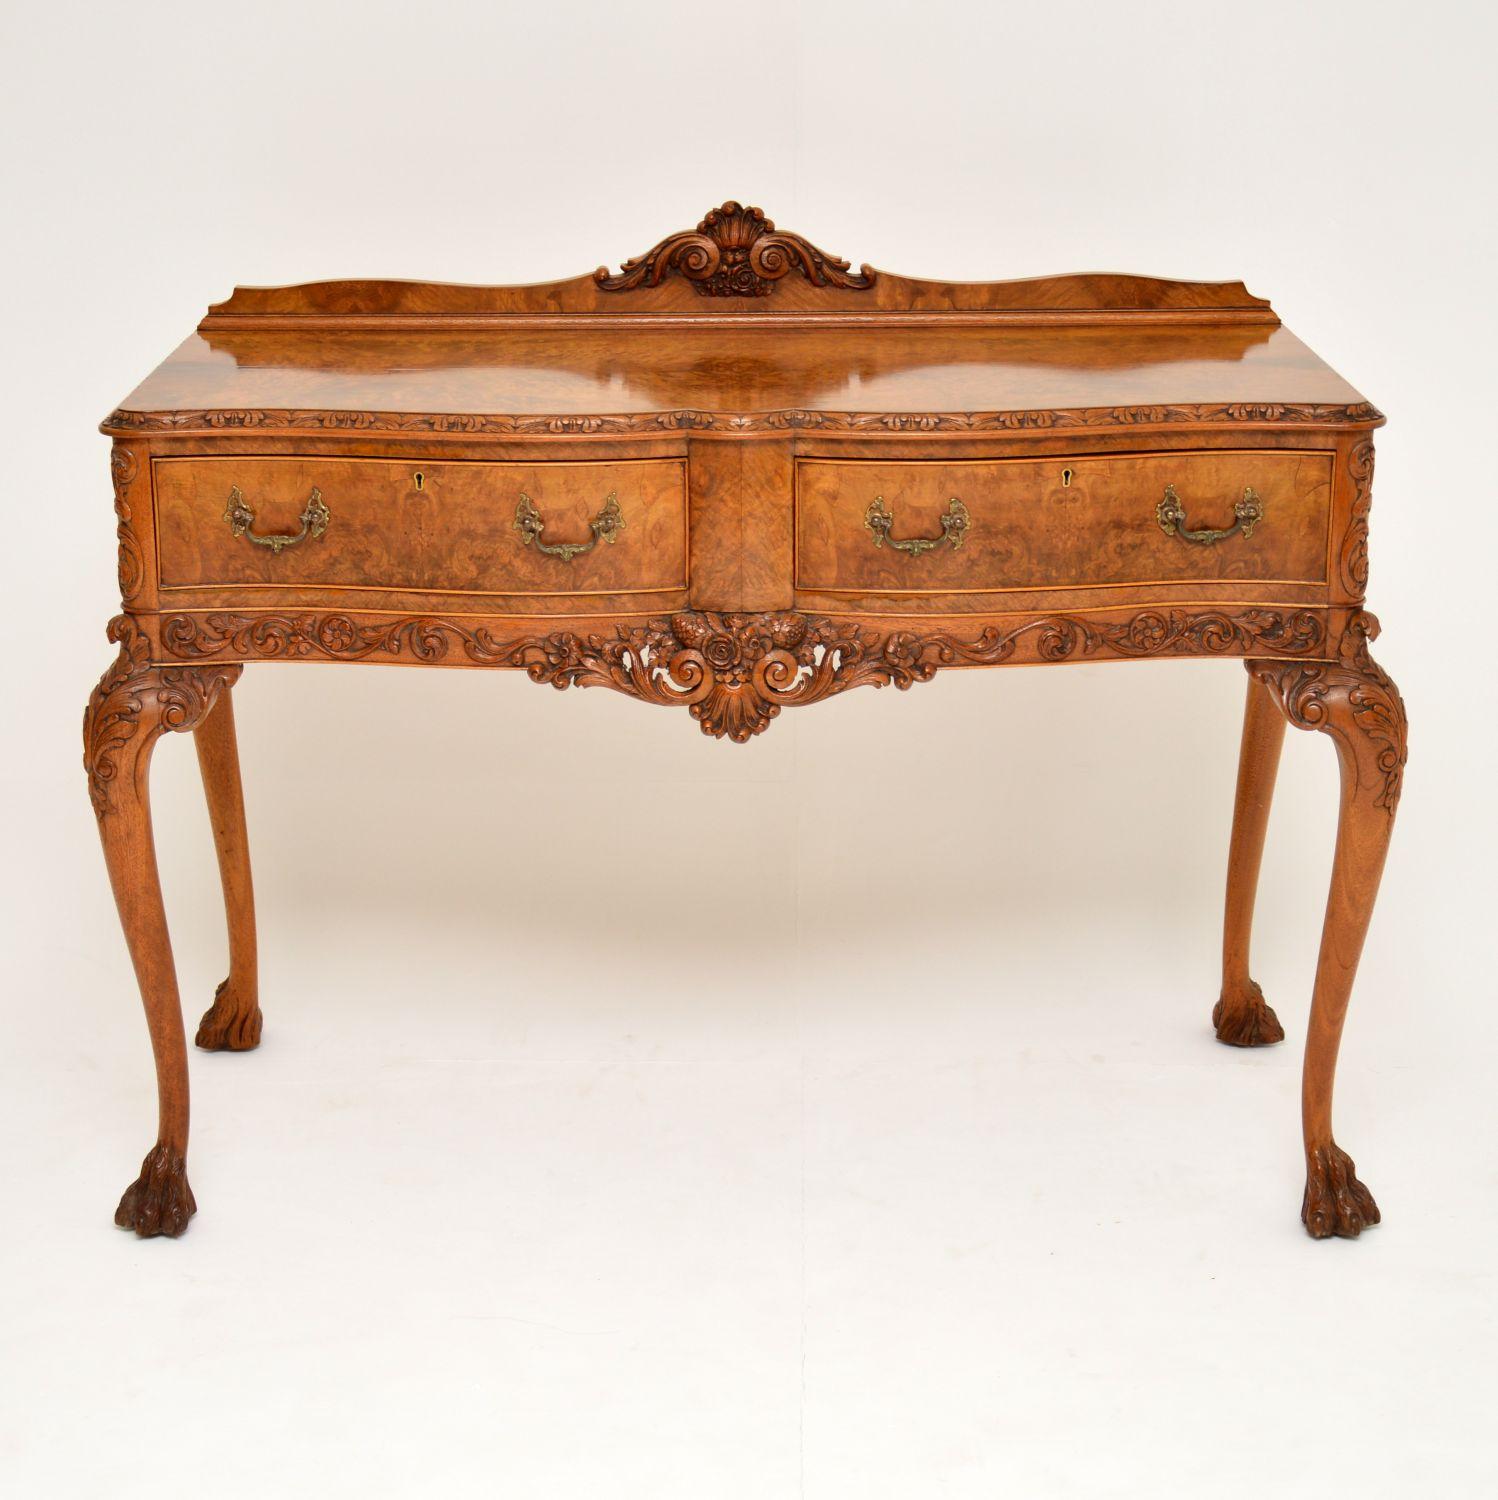 This antique Queen Anne style burr walnut server or console table is superb quality and has some wonderful details. It dates from circa 1920s period and has just been French polished, so is in excellent condition. The hand carving is of the highest